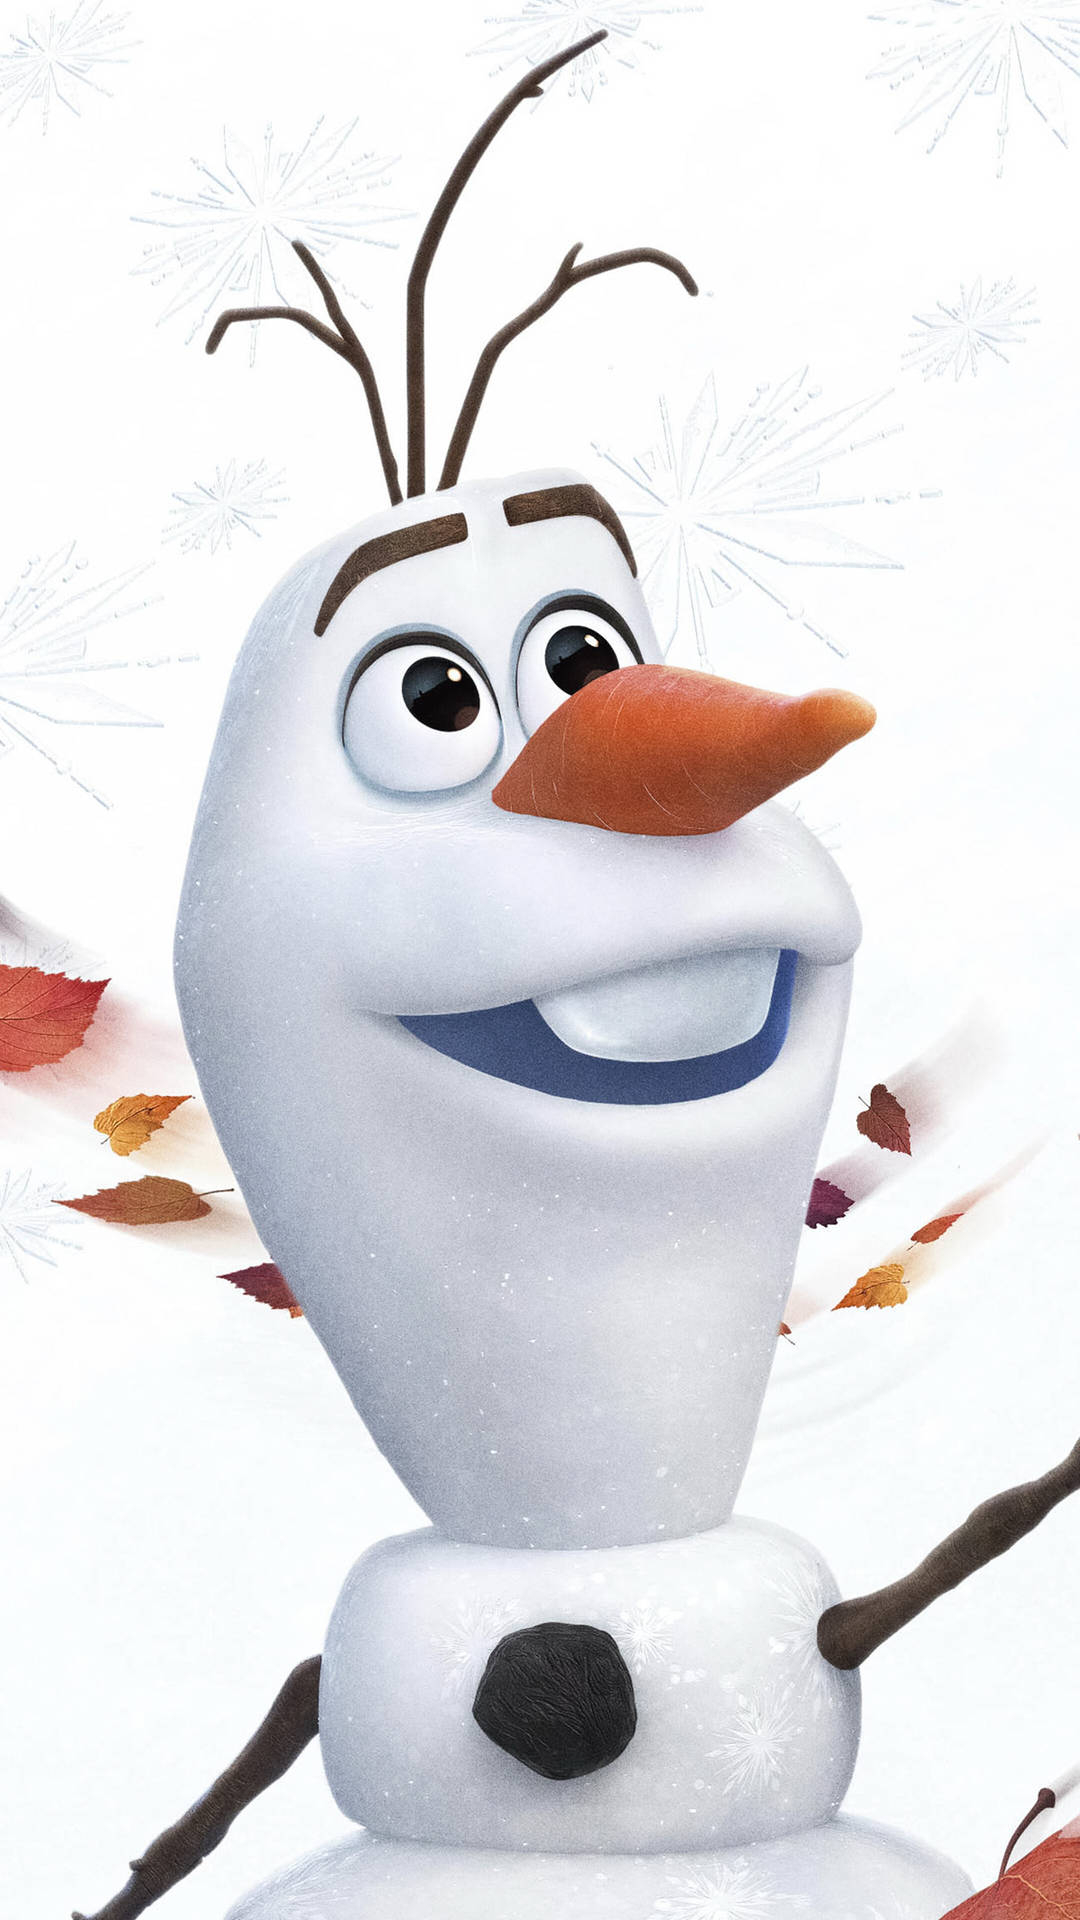 1080x1920 Download Adorable Olaf The Snowman Wallpaper